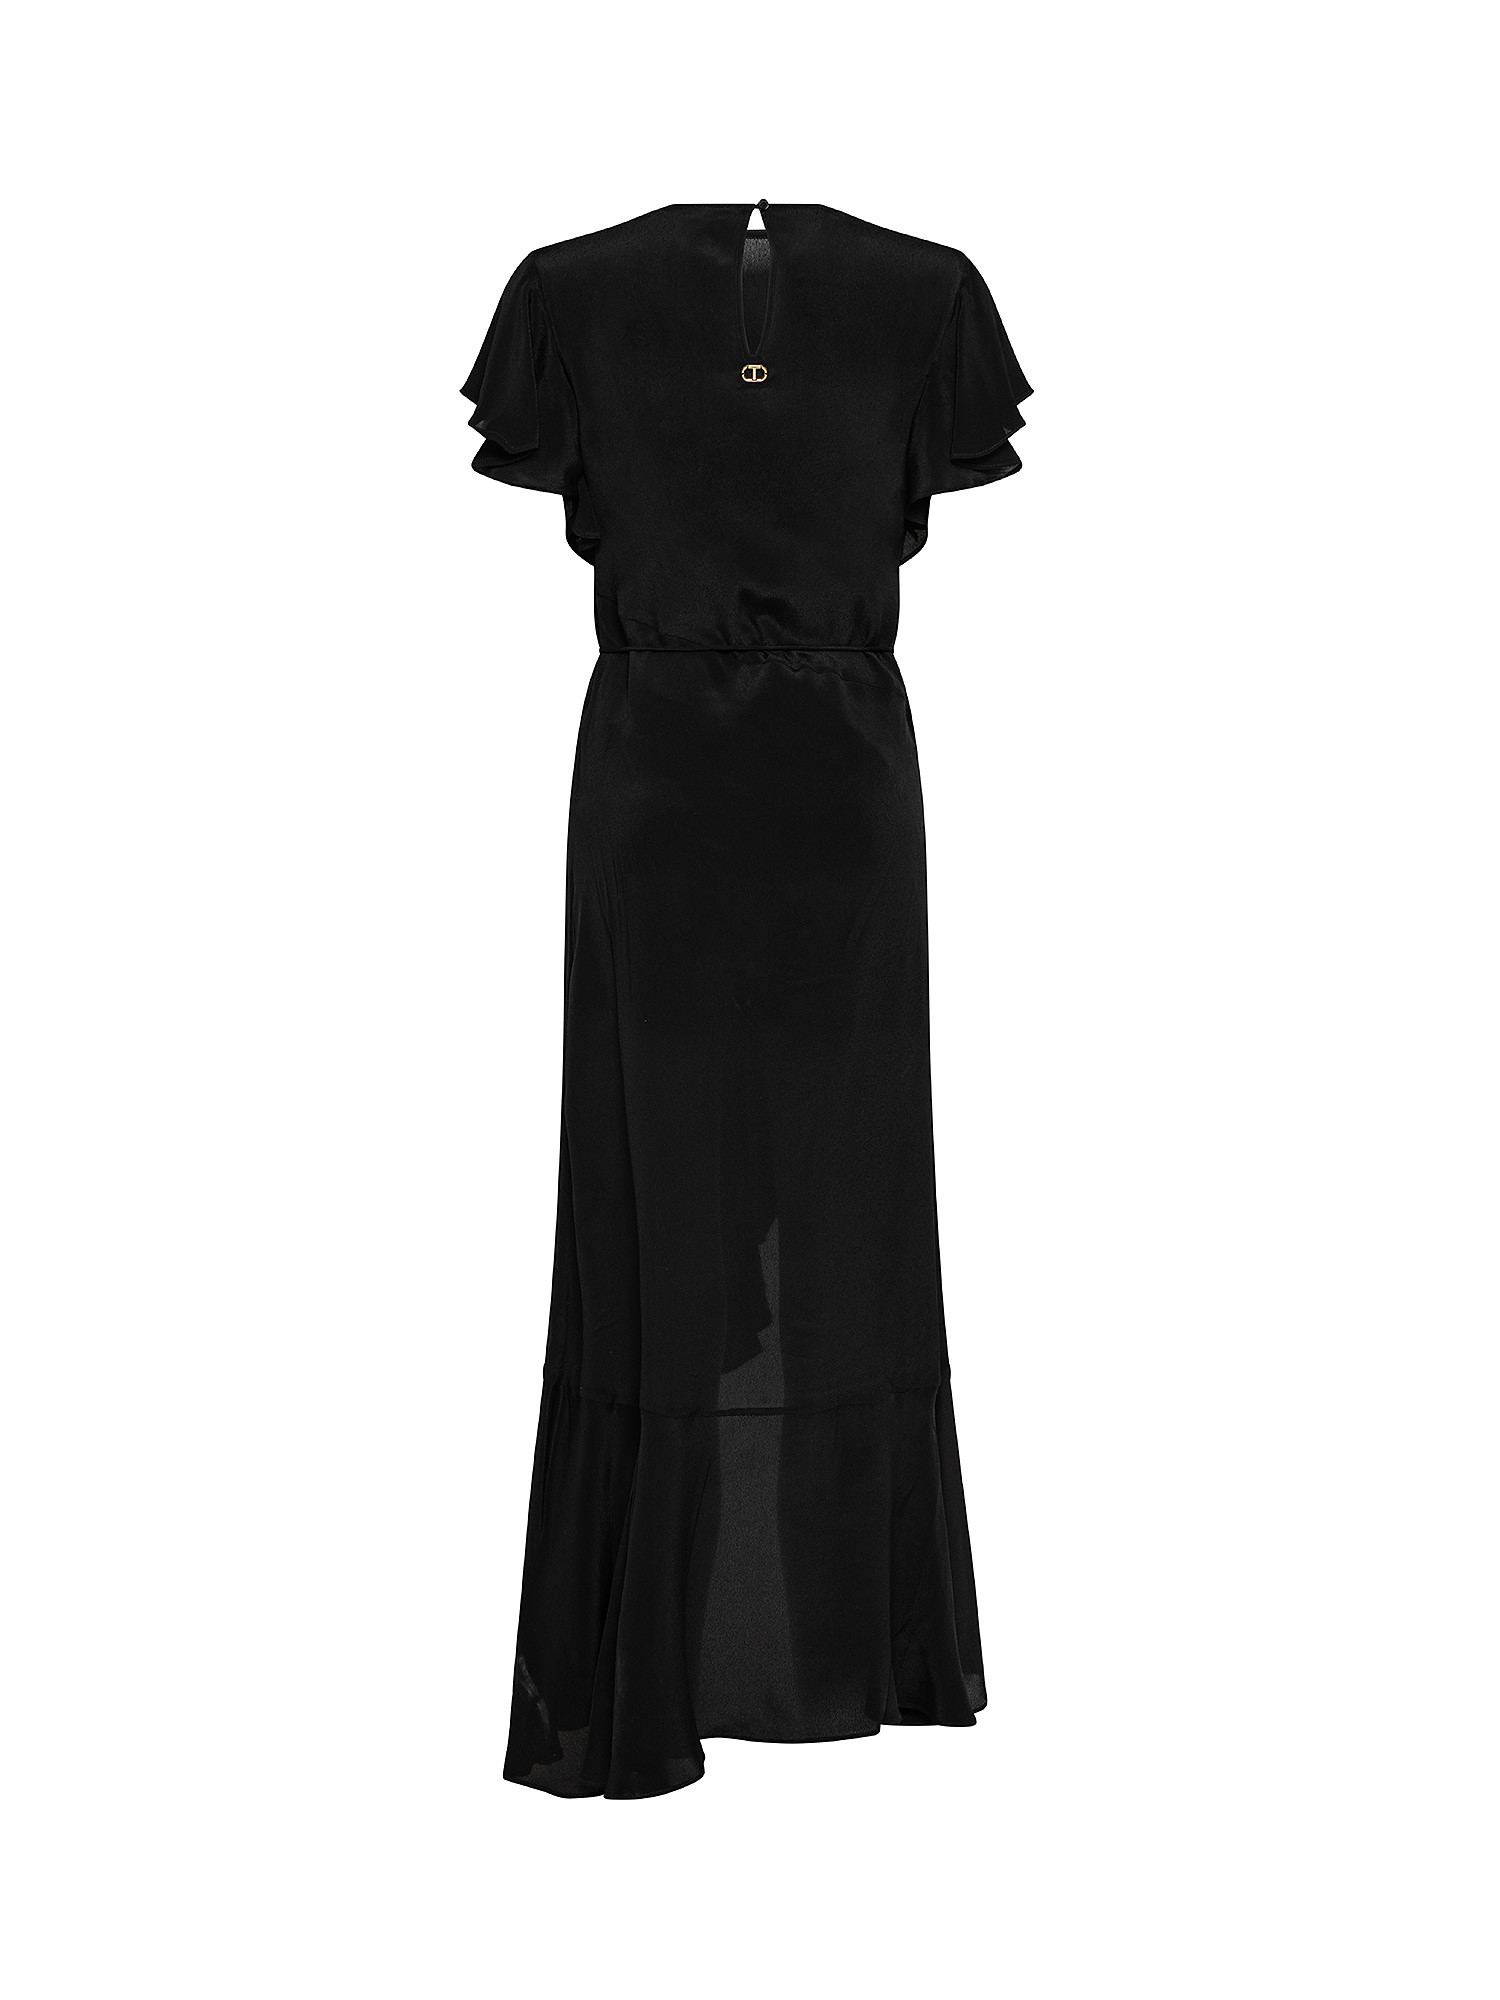 Long dress in silk blend with ruffles, Black, large image number 1